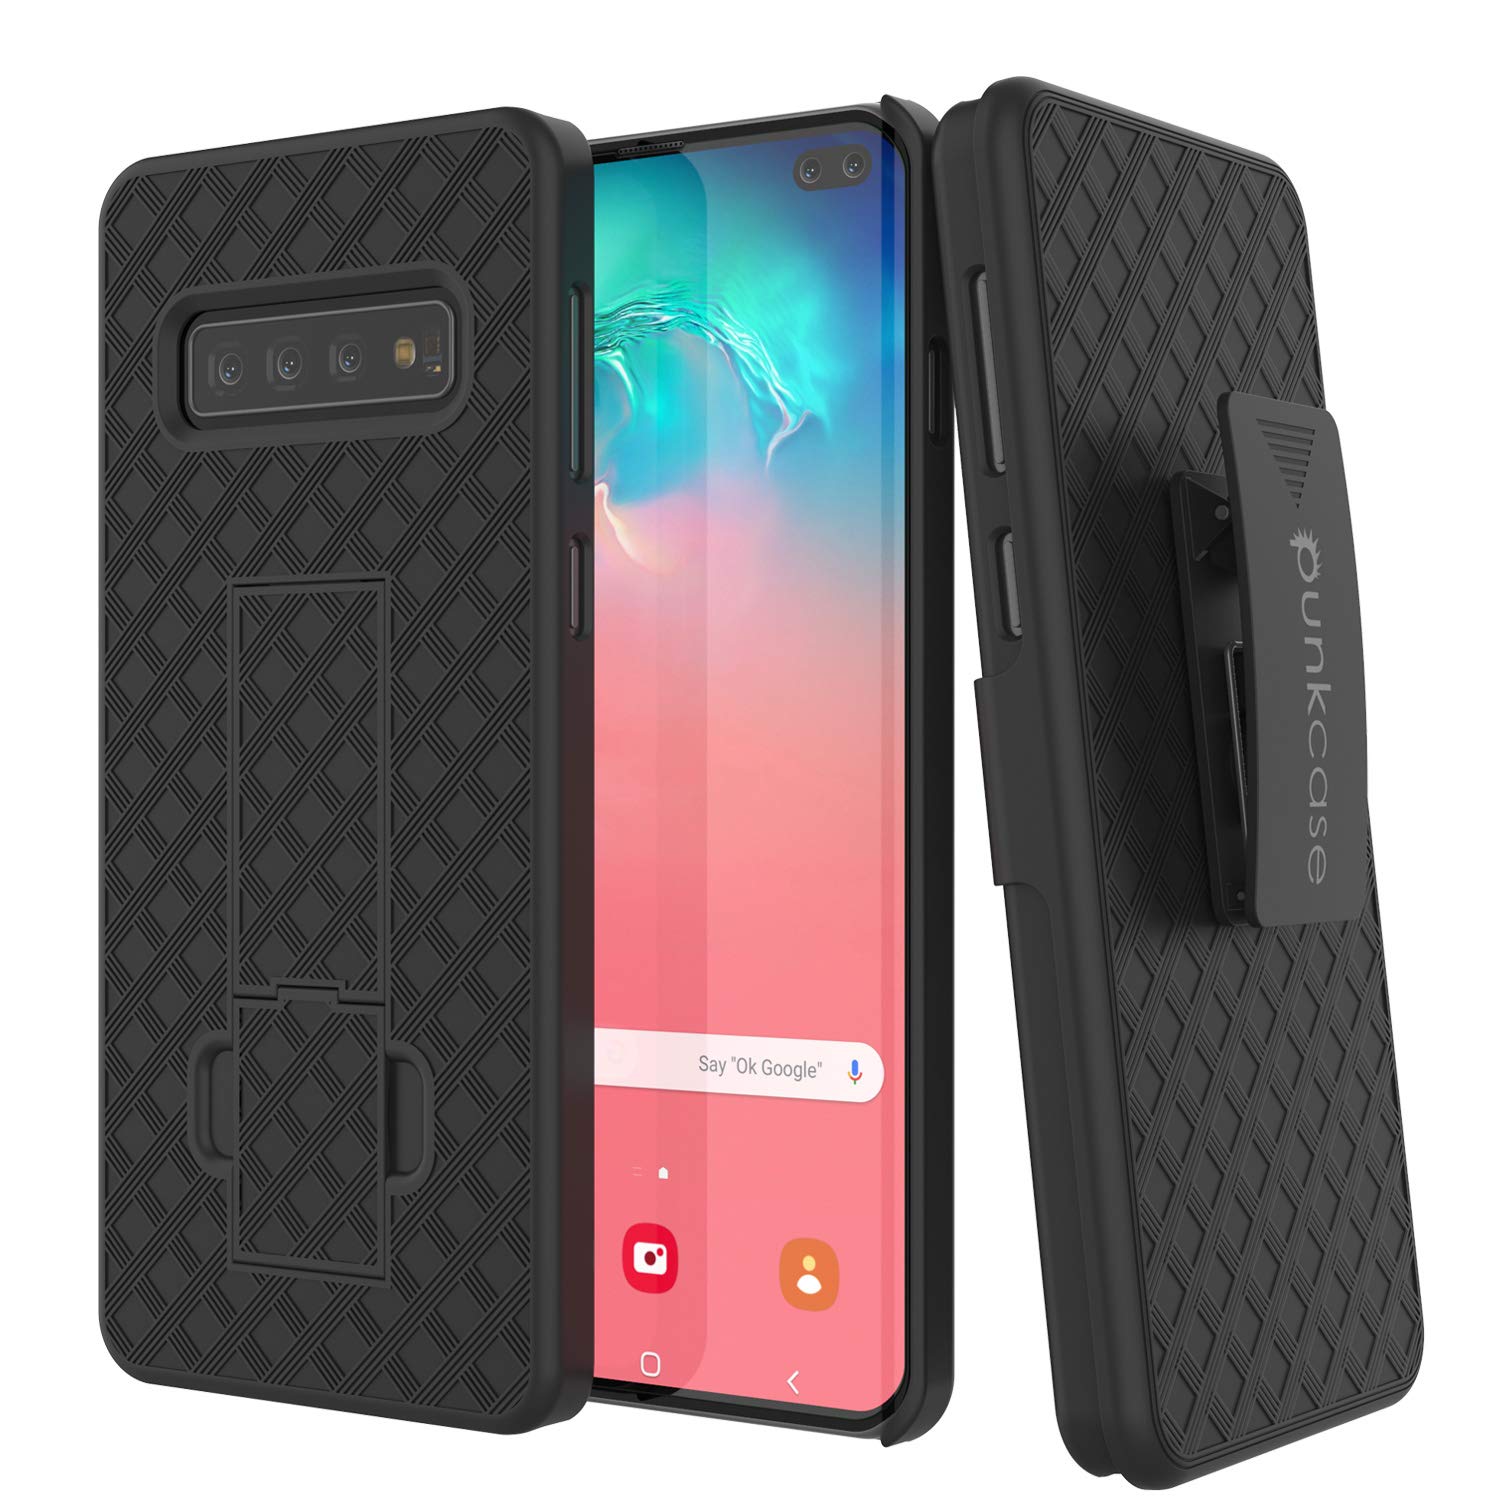 Punkcase Galaxy s10+ Plus Case With Screen Protector, Holster Belt Clip [Black]